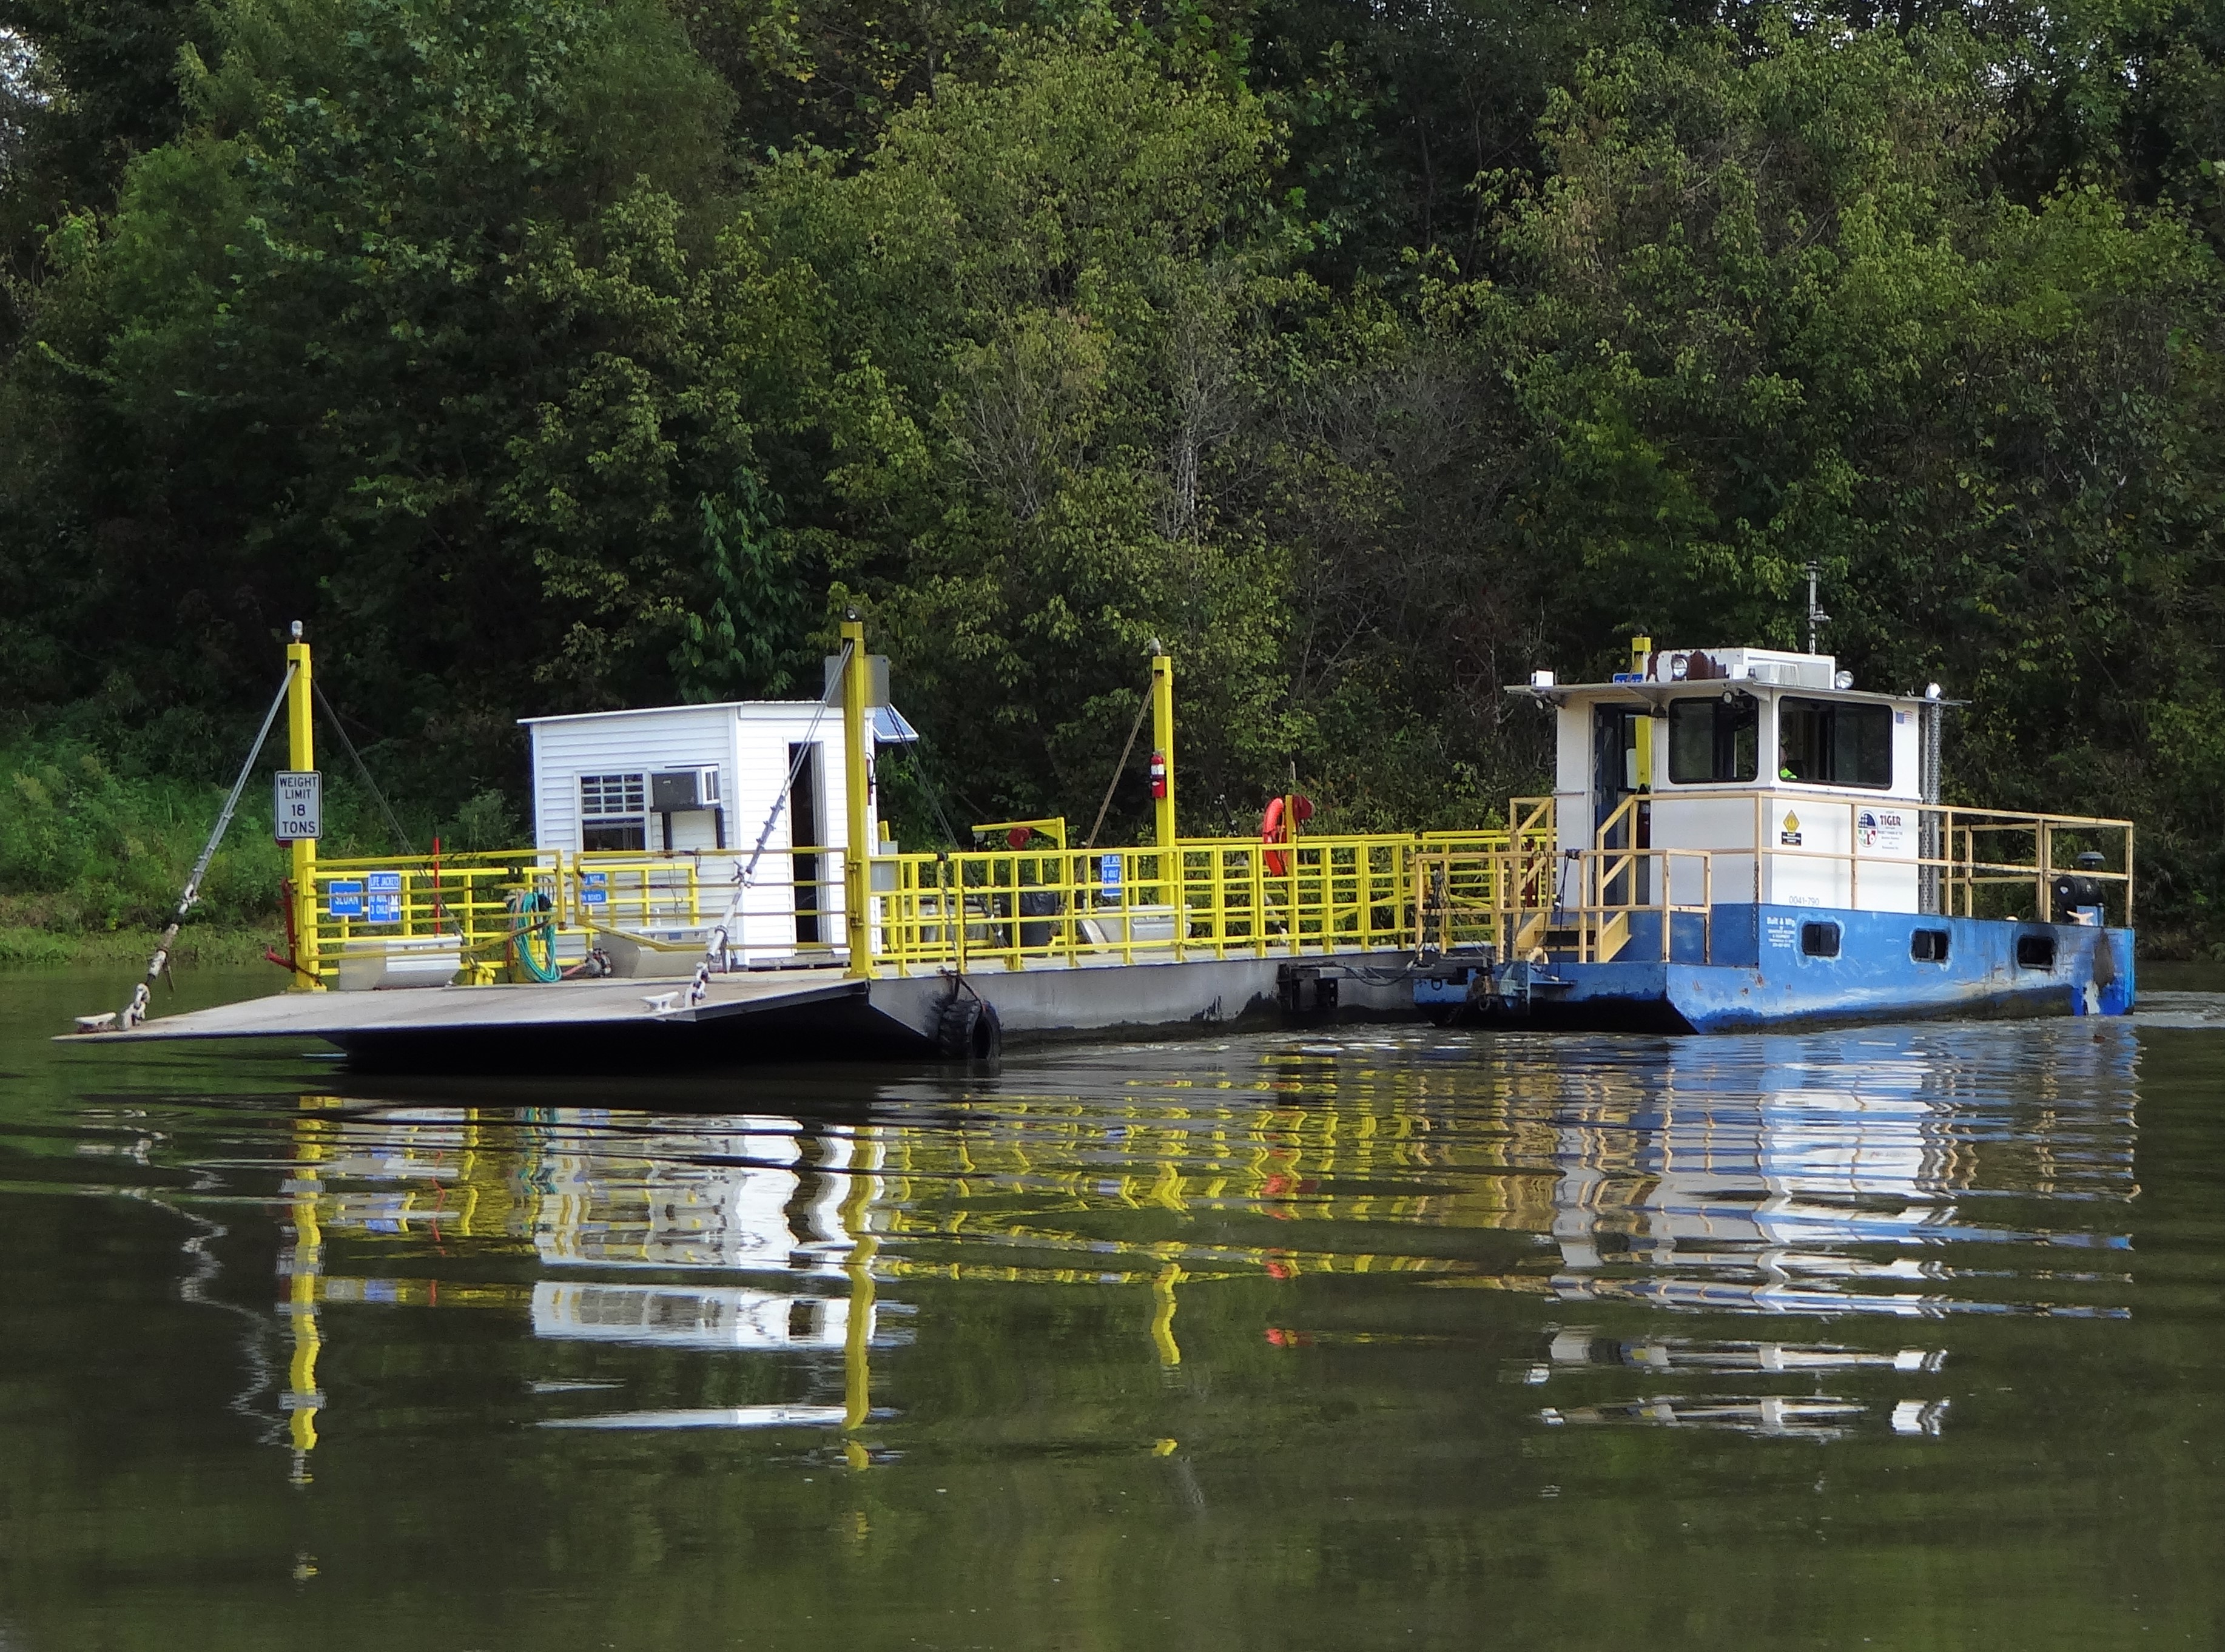 Turkey Neck Bend ferryboat ferrying vehicles across the Cumberland river